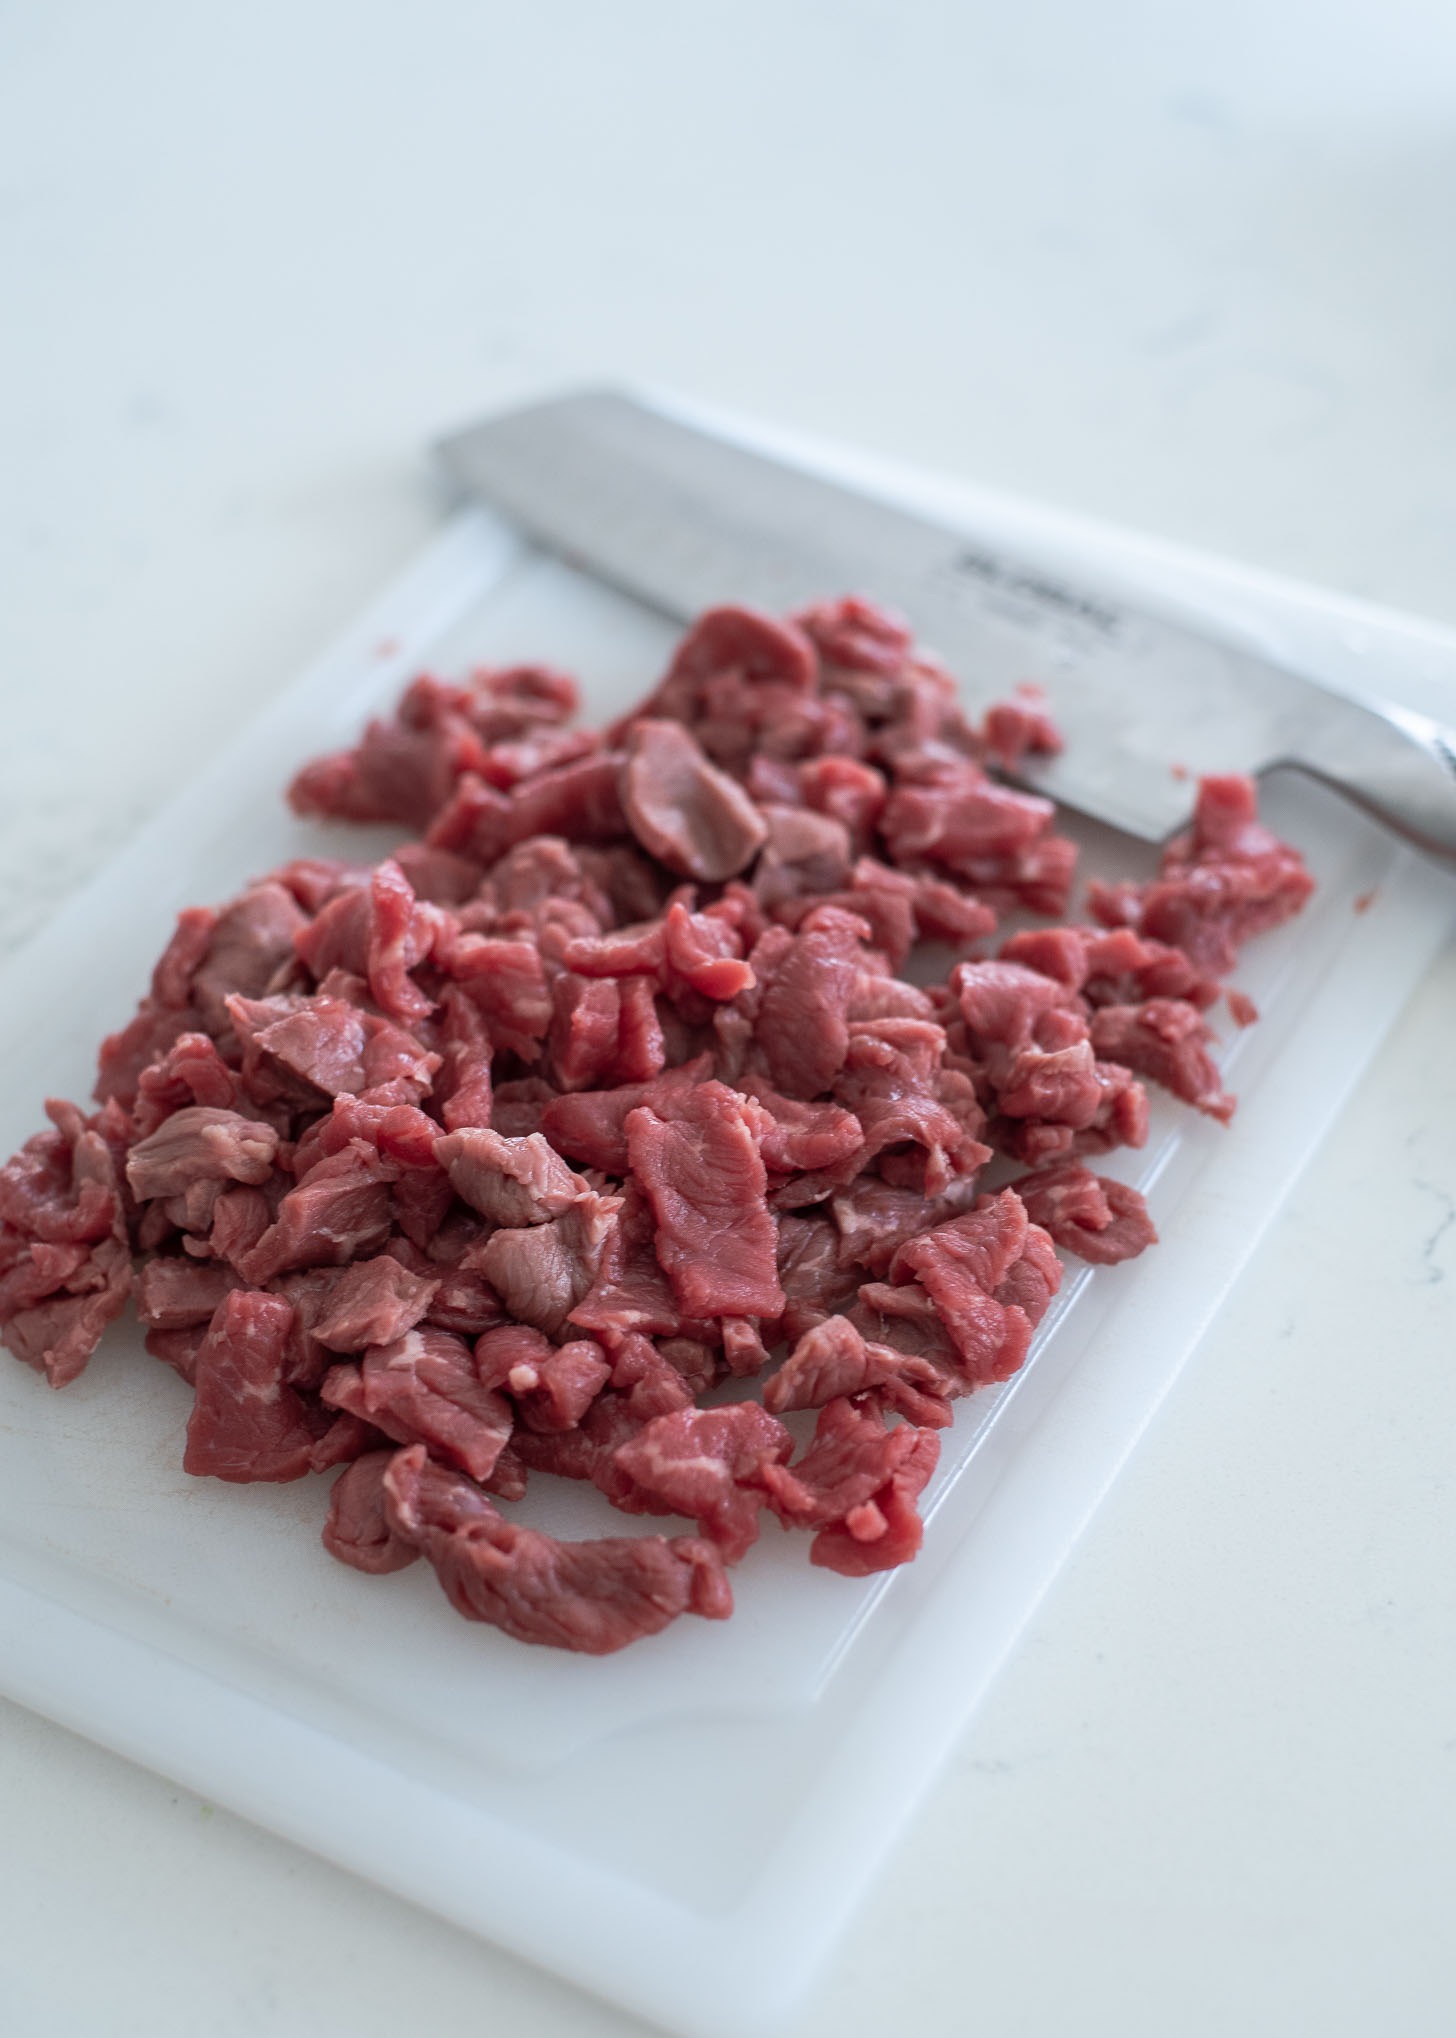 This beef slices are diced into bite size pieces.